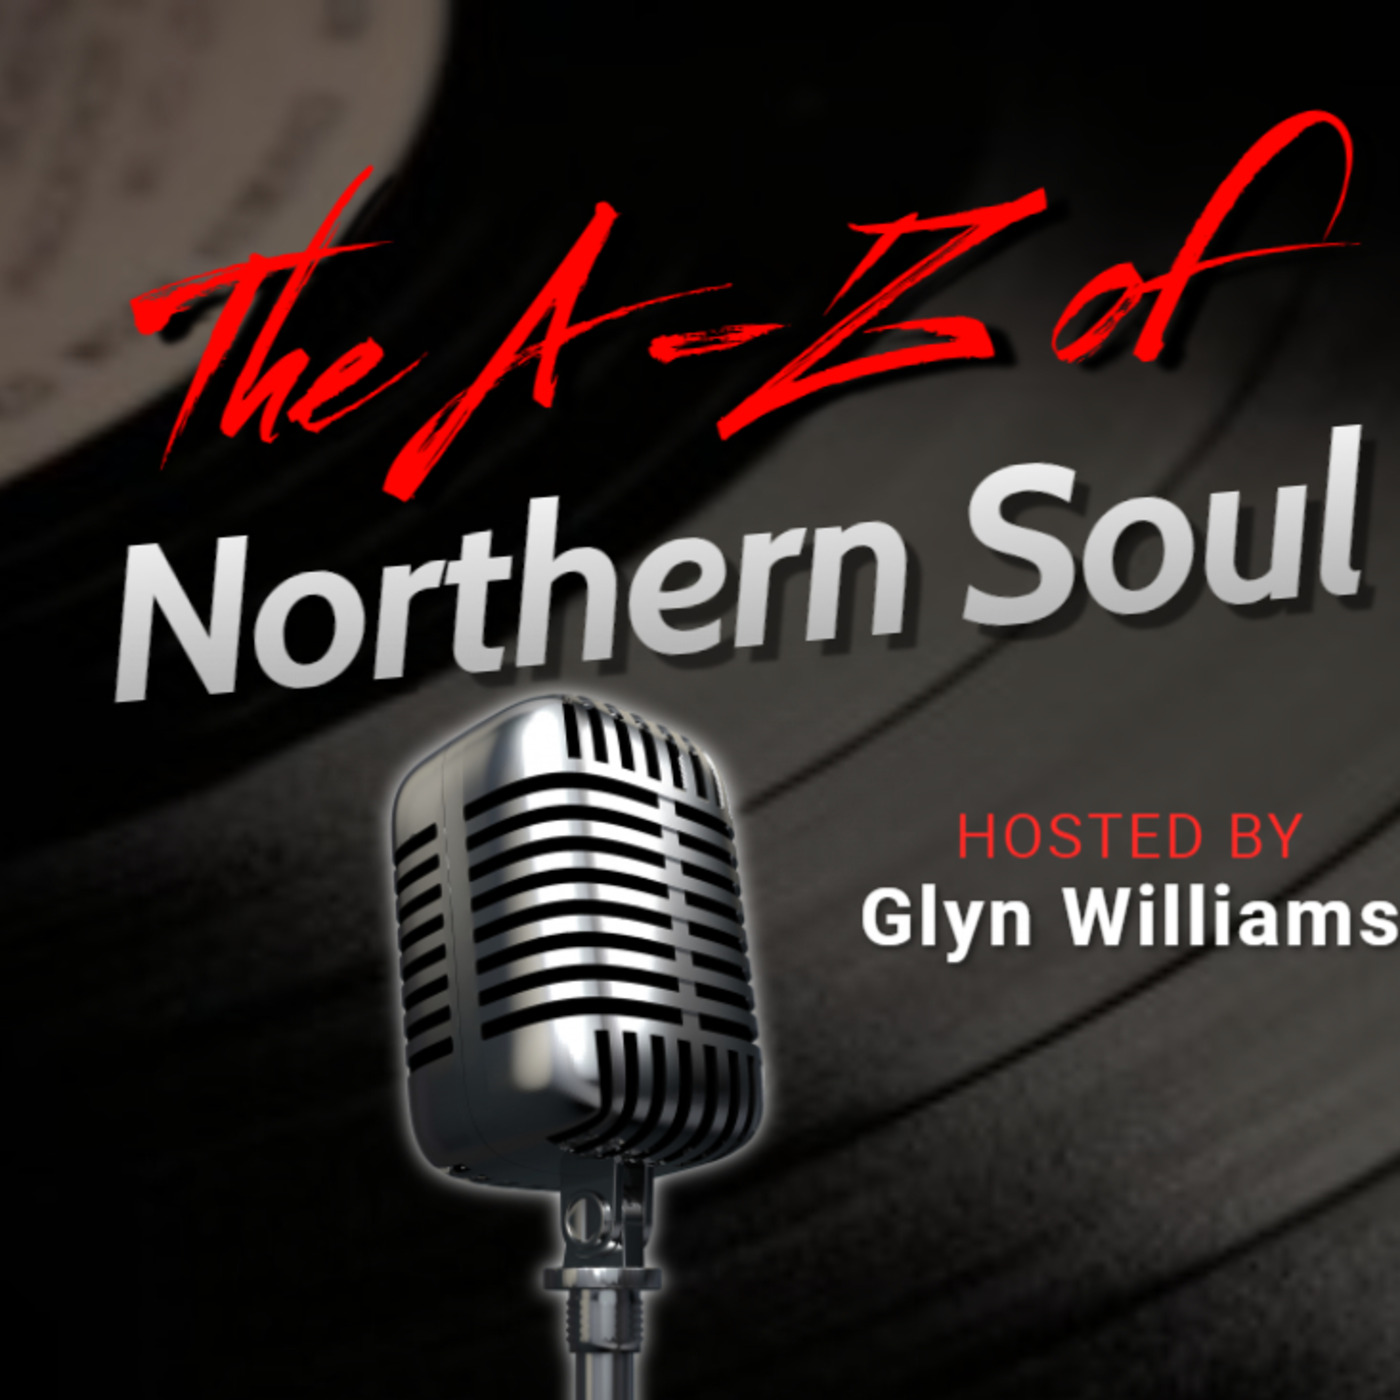 The A-Z of Northern Soul E095